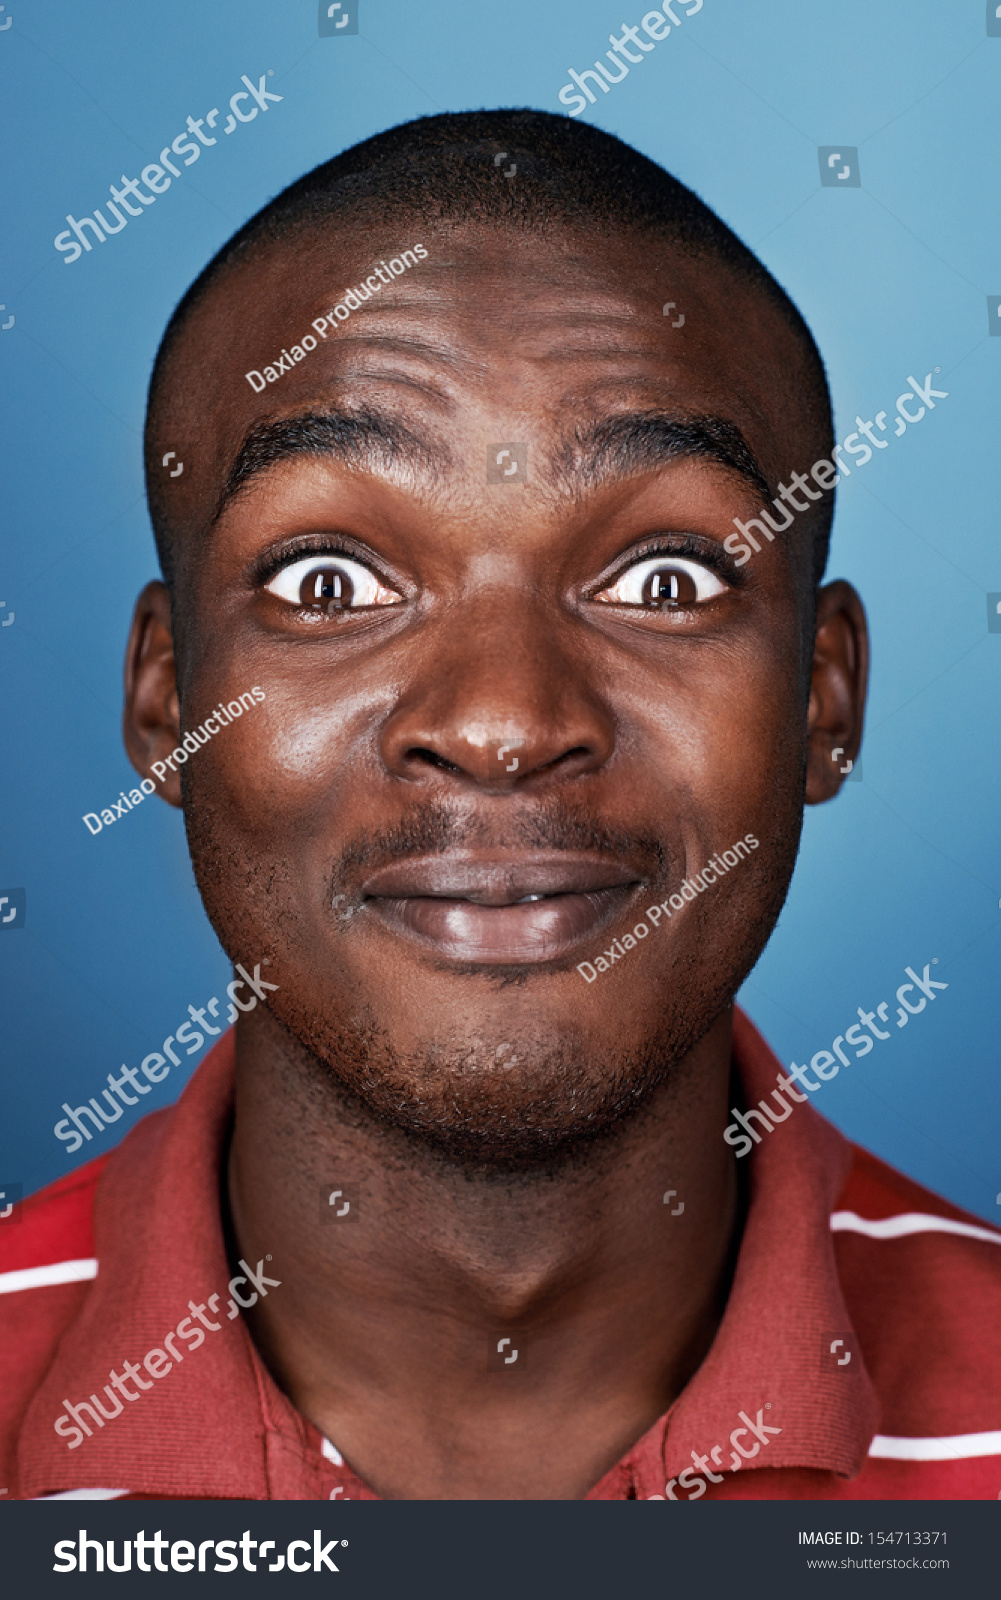 Real African Man Silly Funny Face Stock Photo 154713371 